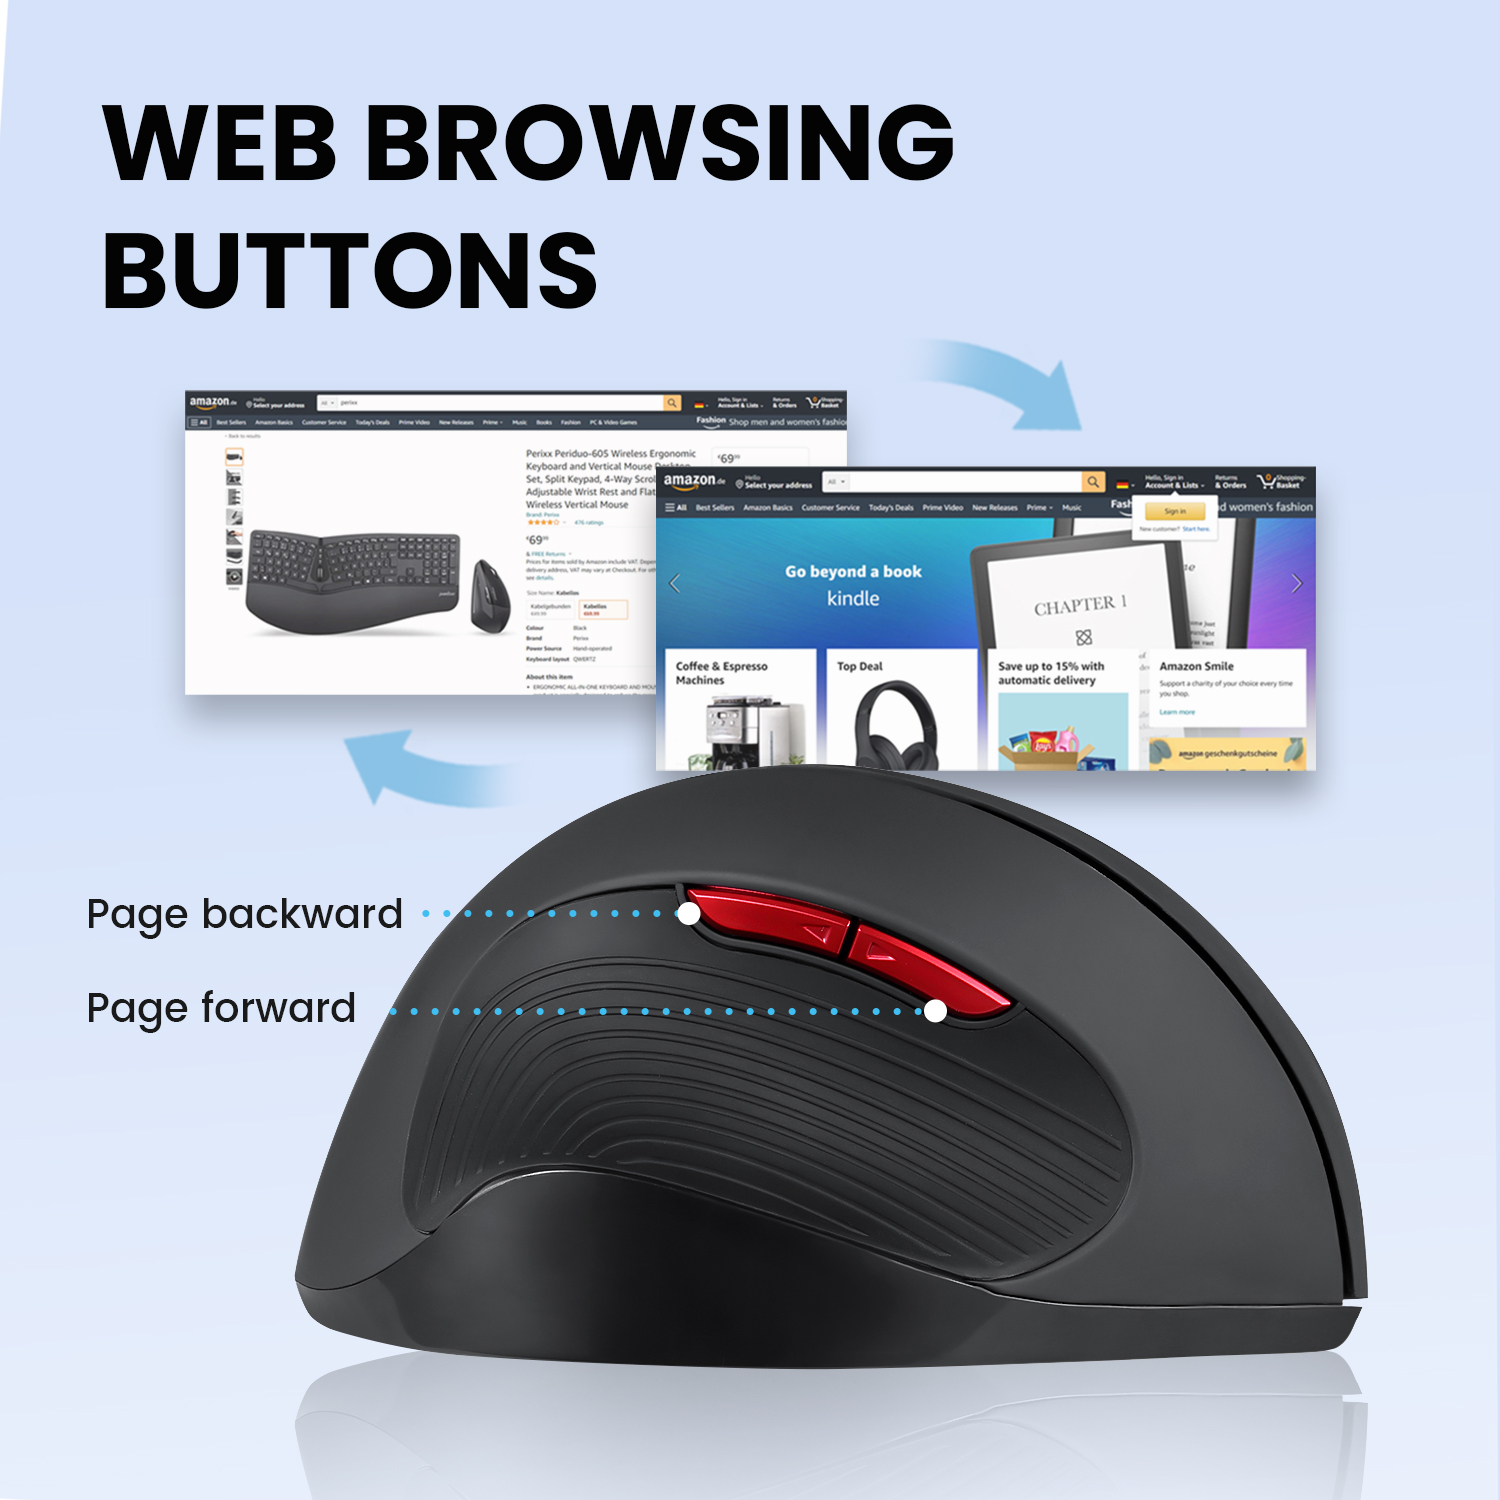 6-BUTTON DESIGN WITH WEB BROWSING BUTTONS